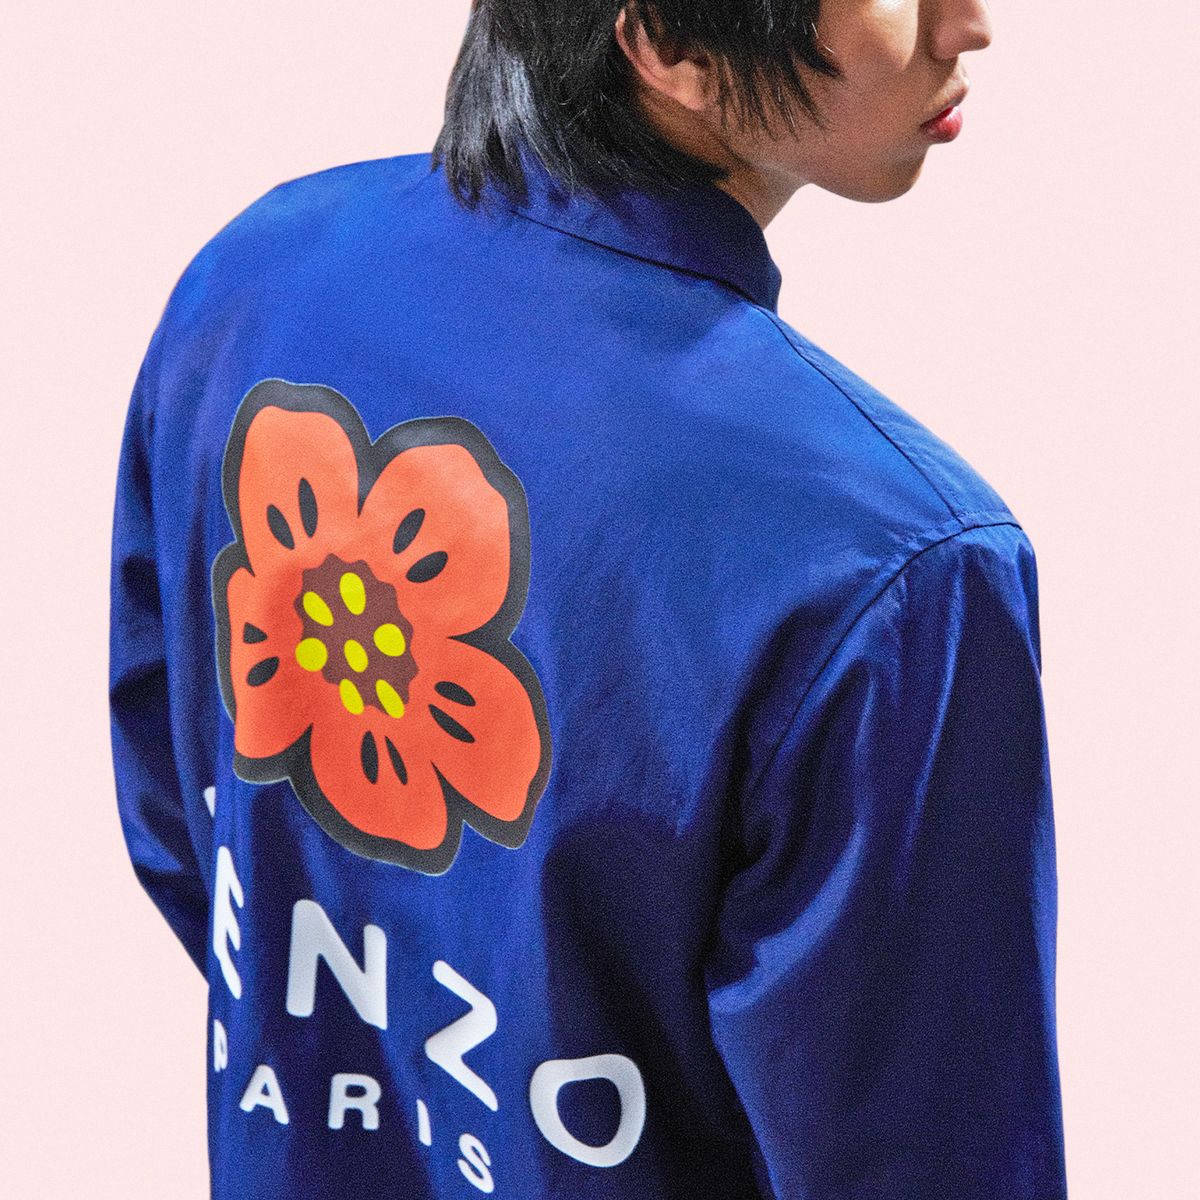 Kenzo Drops First Limited-Edition Capsule by Nigo Together With